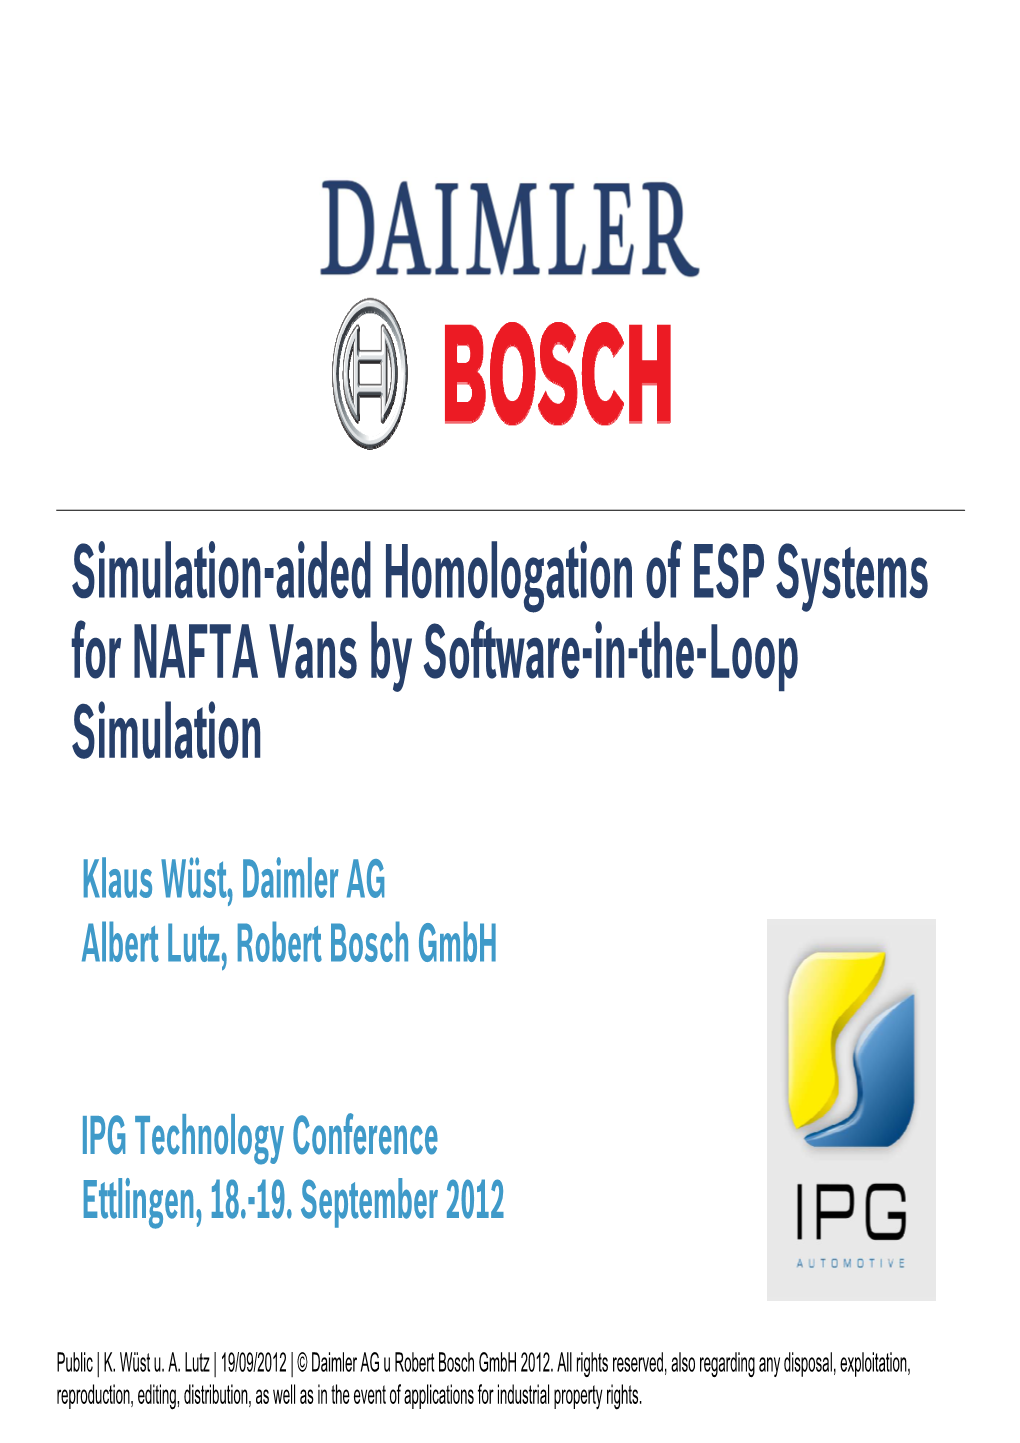 Simulation-Aided Homologation of ESP Systems for NAFTA Vans by Software-In-The-Loop Simulation